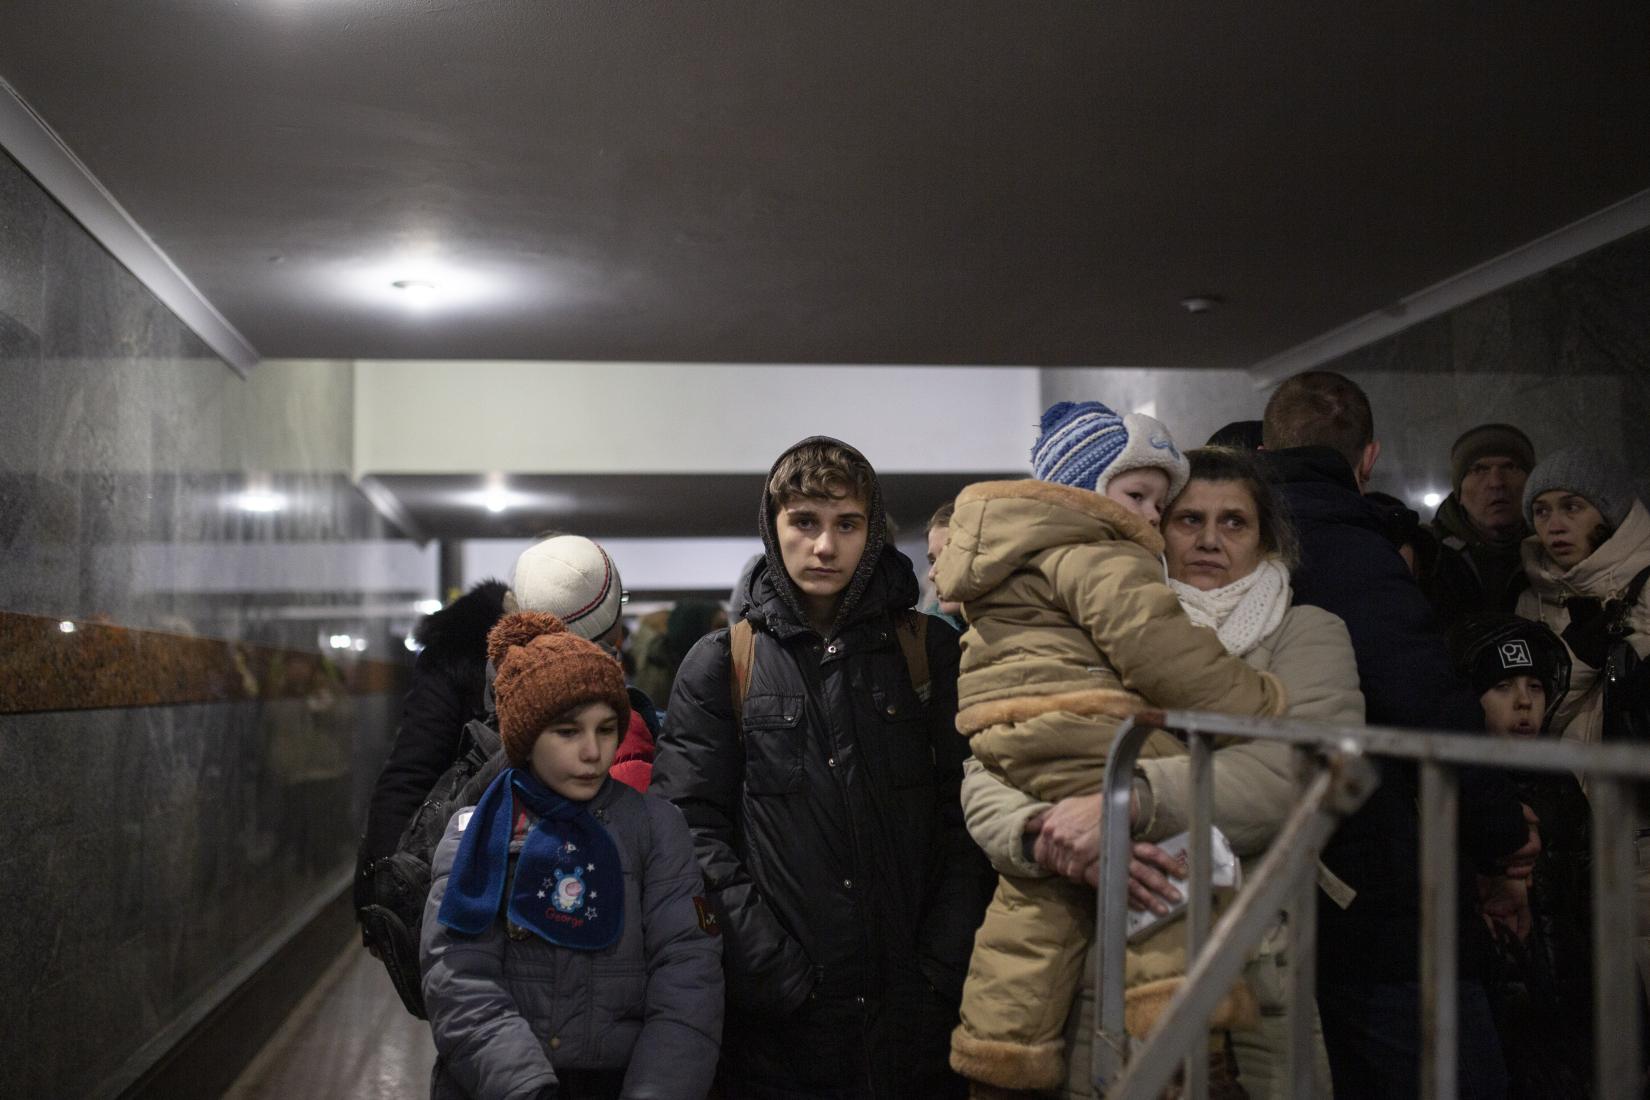 Ukraine. Internally displaced families flee to Lviv to escape conflict further east.